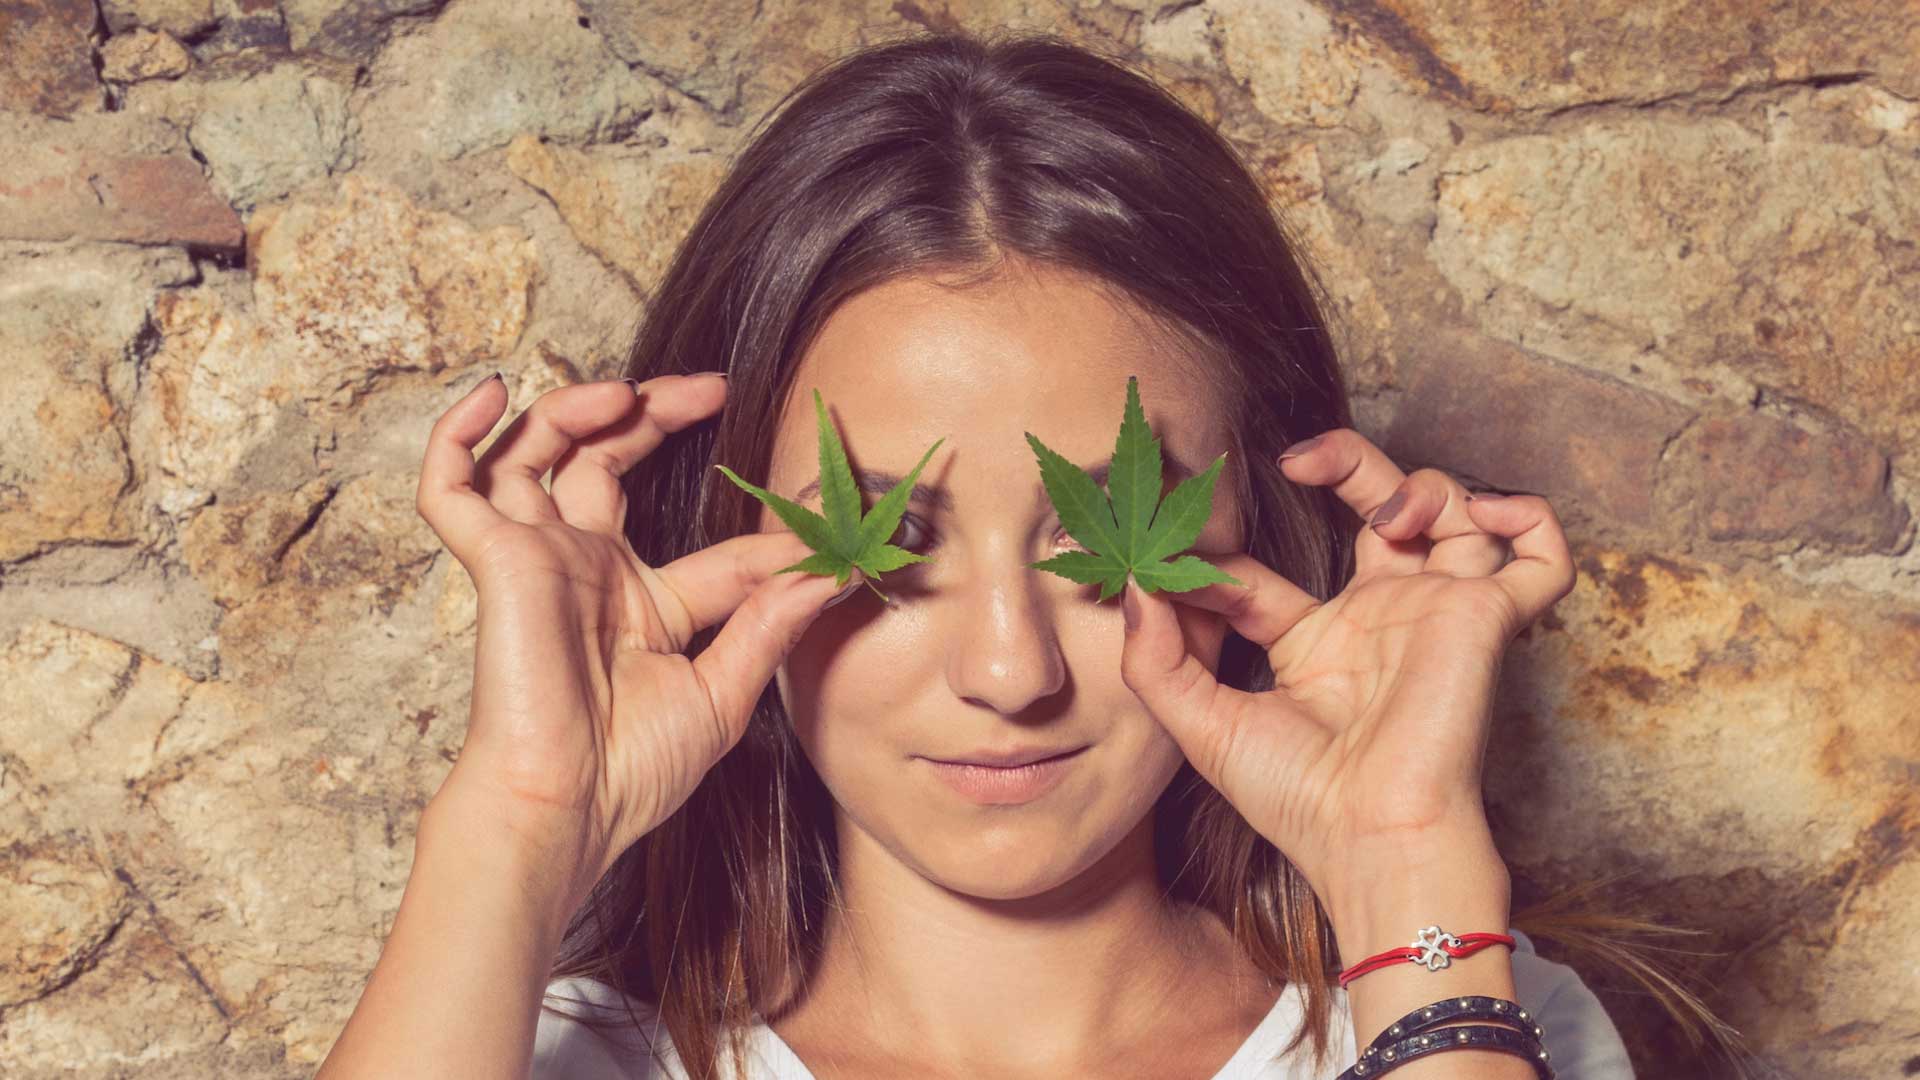 Females are running the cannabis industry